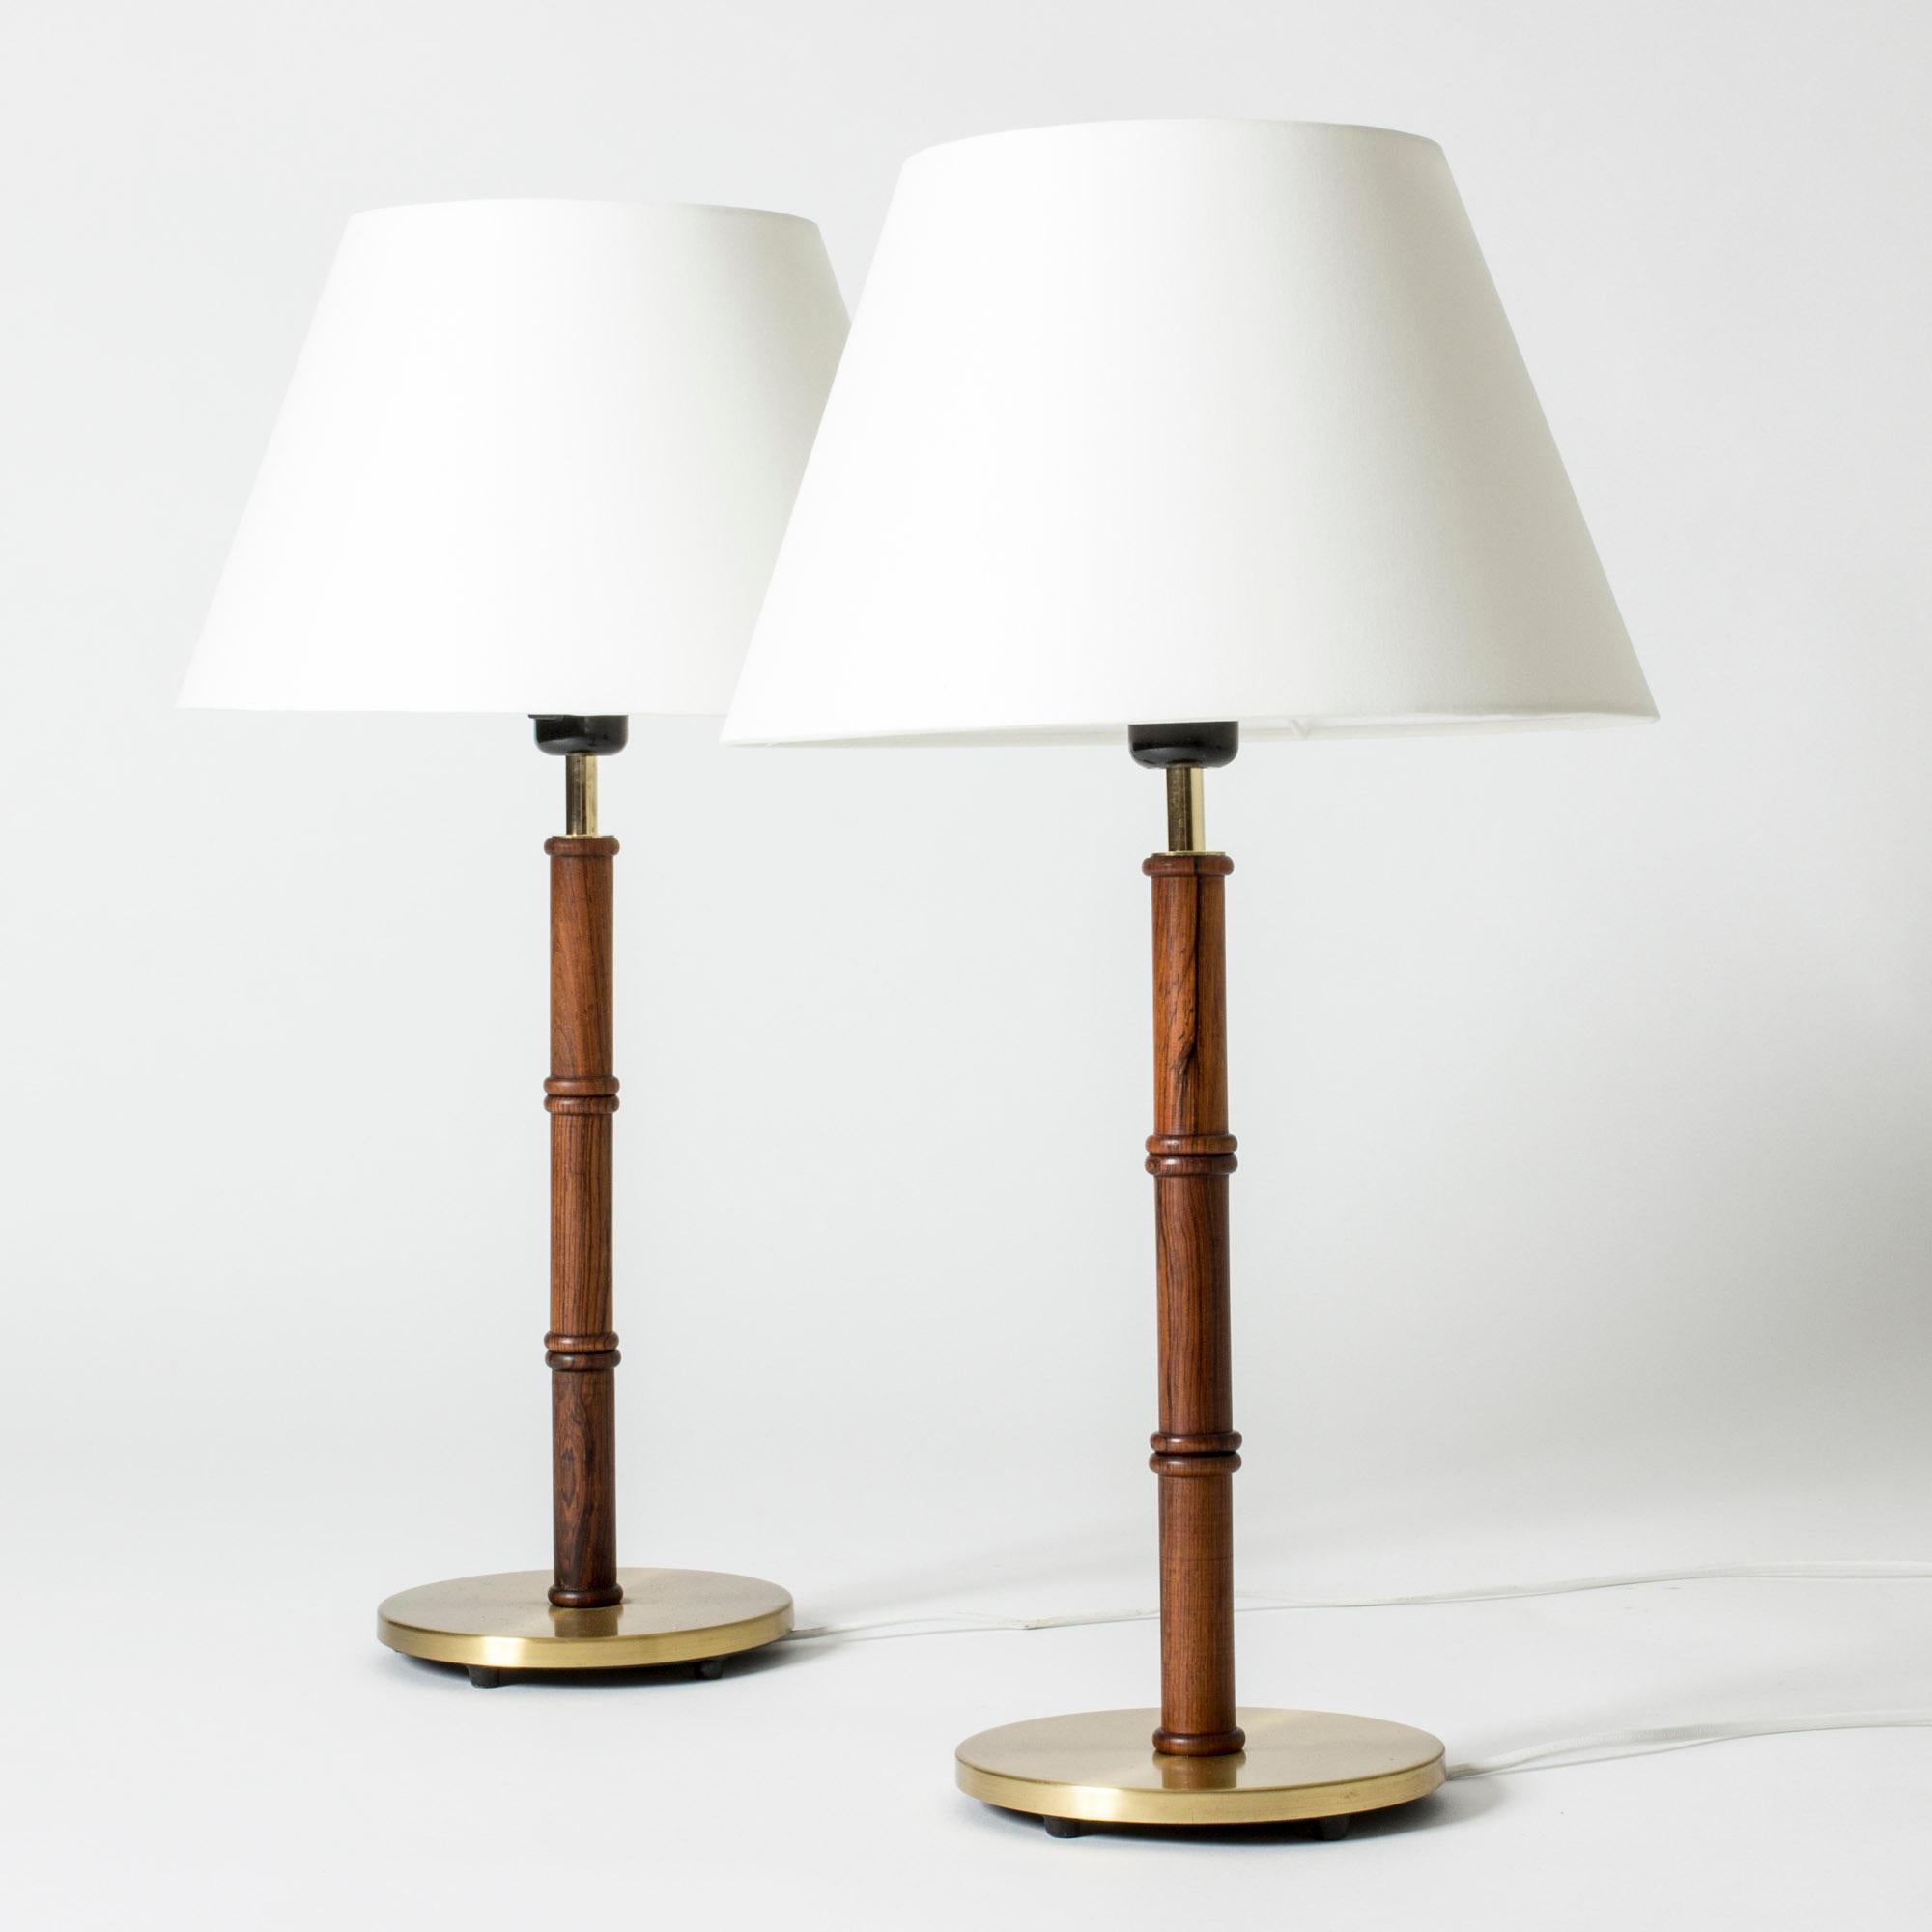 Pair of cool table lamps from Falkenbergs Belysning, made from brass with a rosewood stem. Wood elegantly carved into a bamboo-stem form.